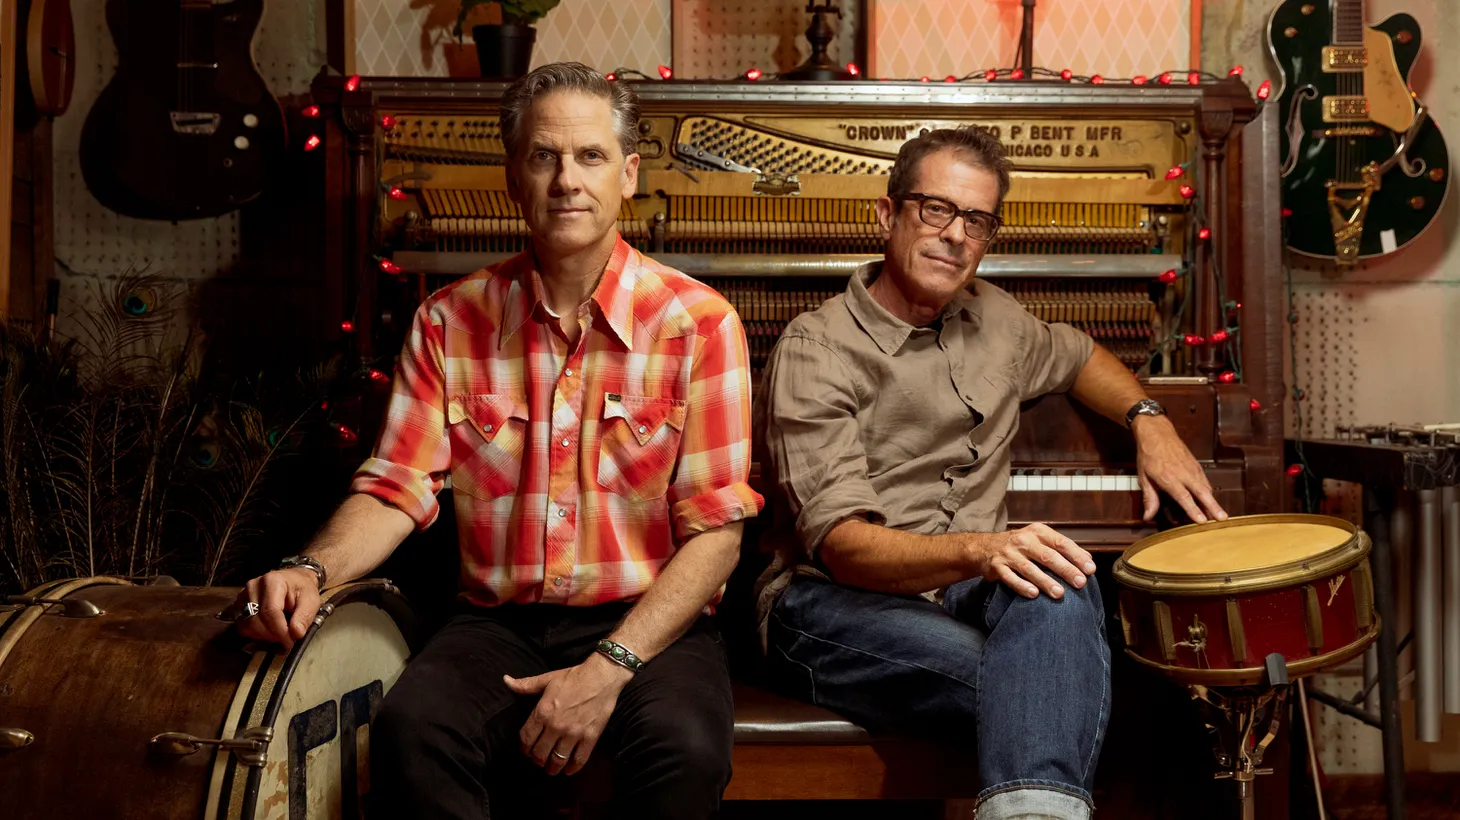 From the first notes, one can identify the signature sound of Calexico channeling a certain Southwestern beat. Building songs rooted in bass and drums, their tenth studio album is “dedicated to family, friends and community.”